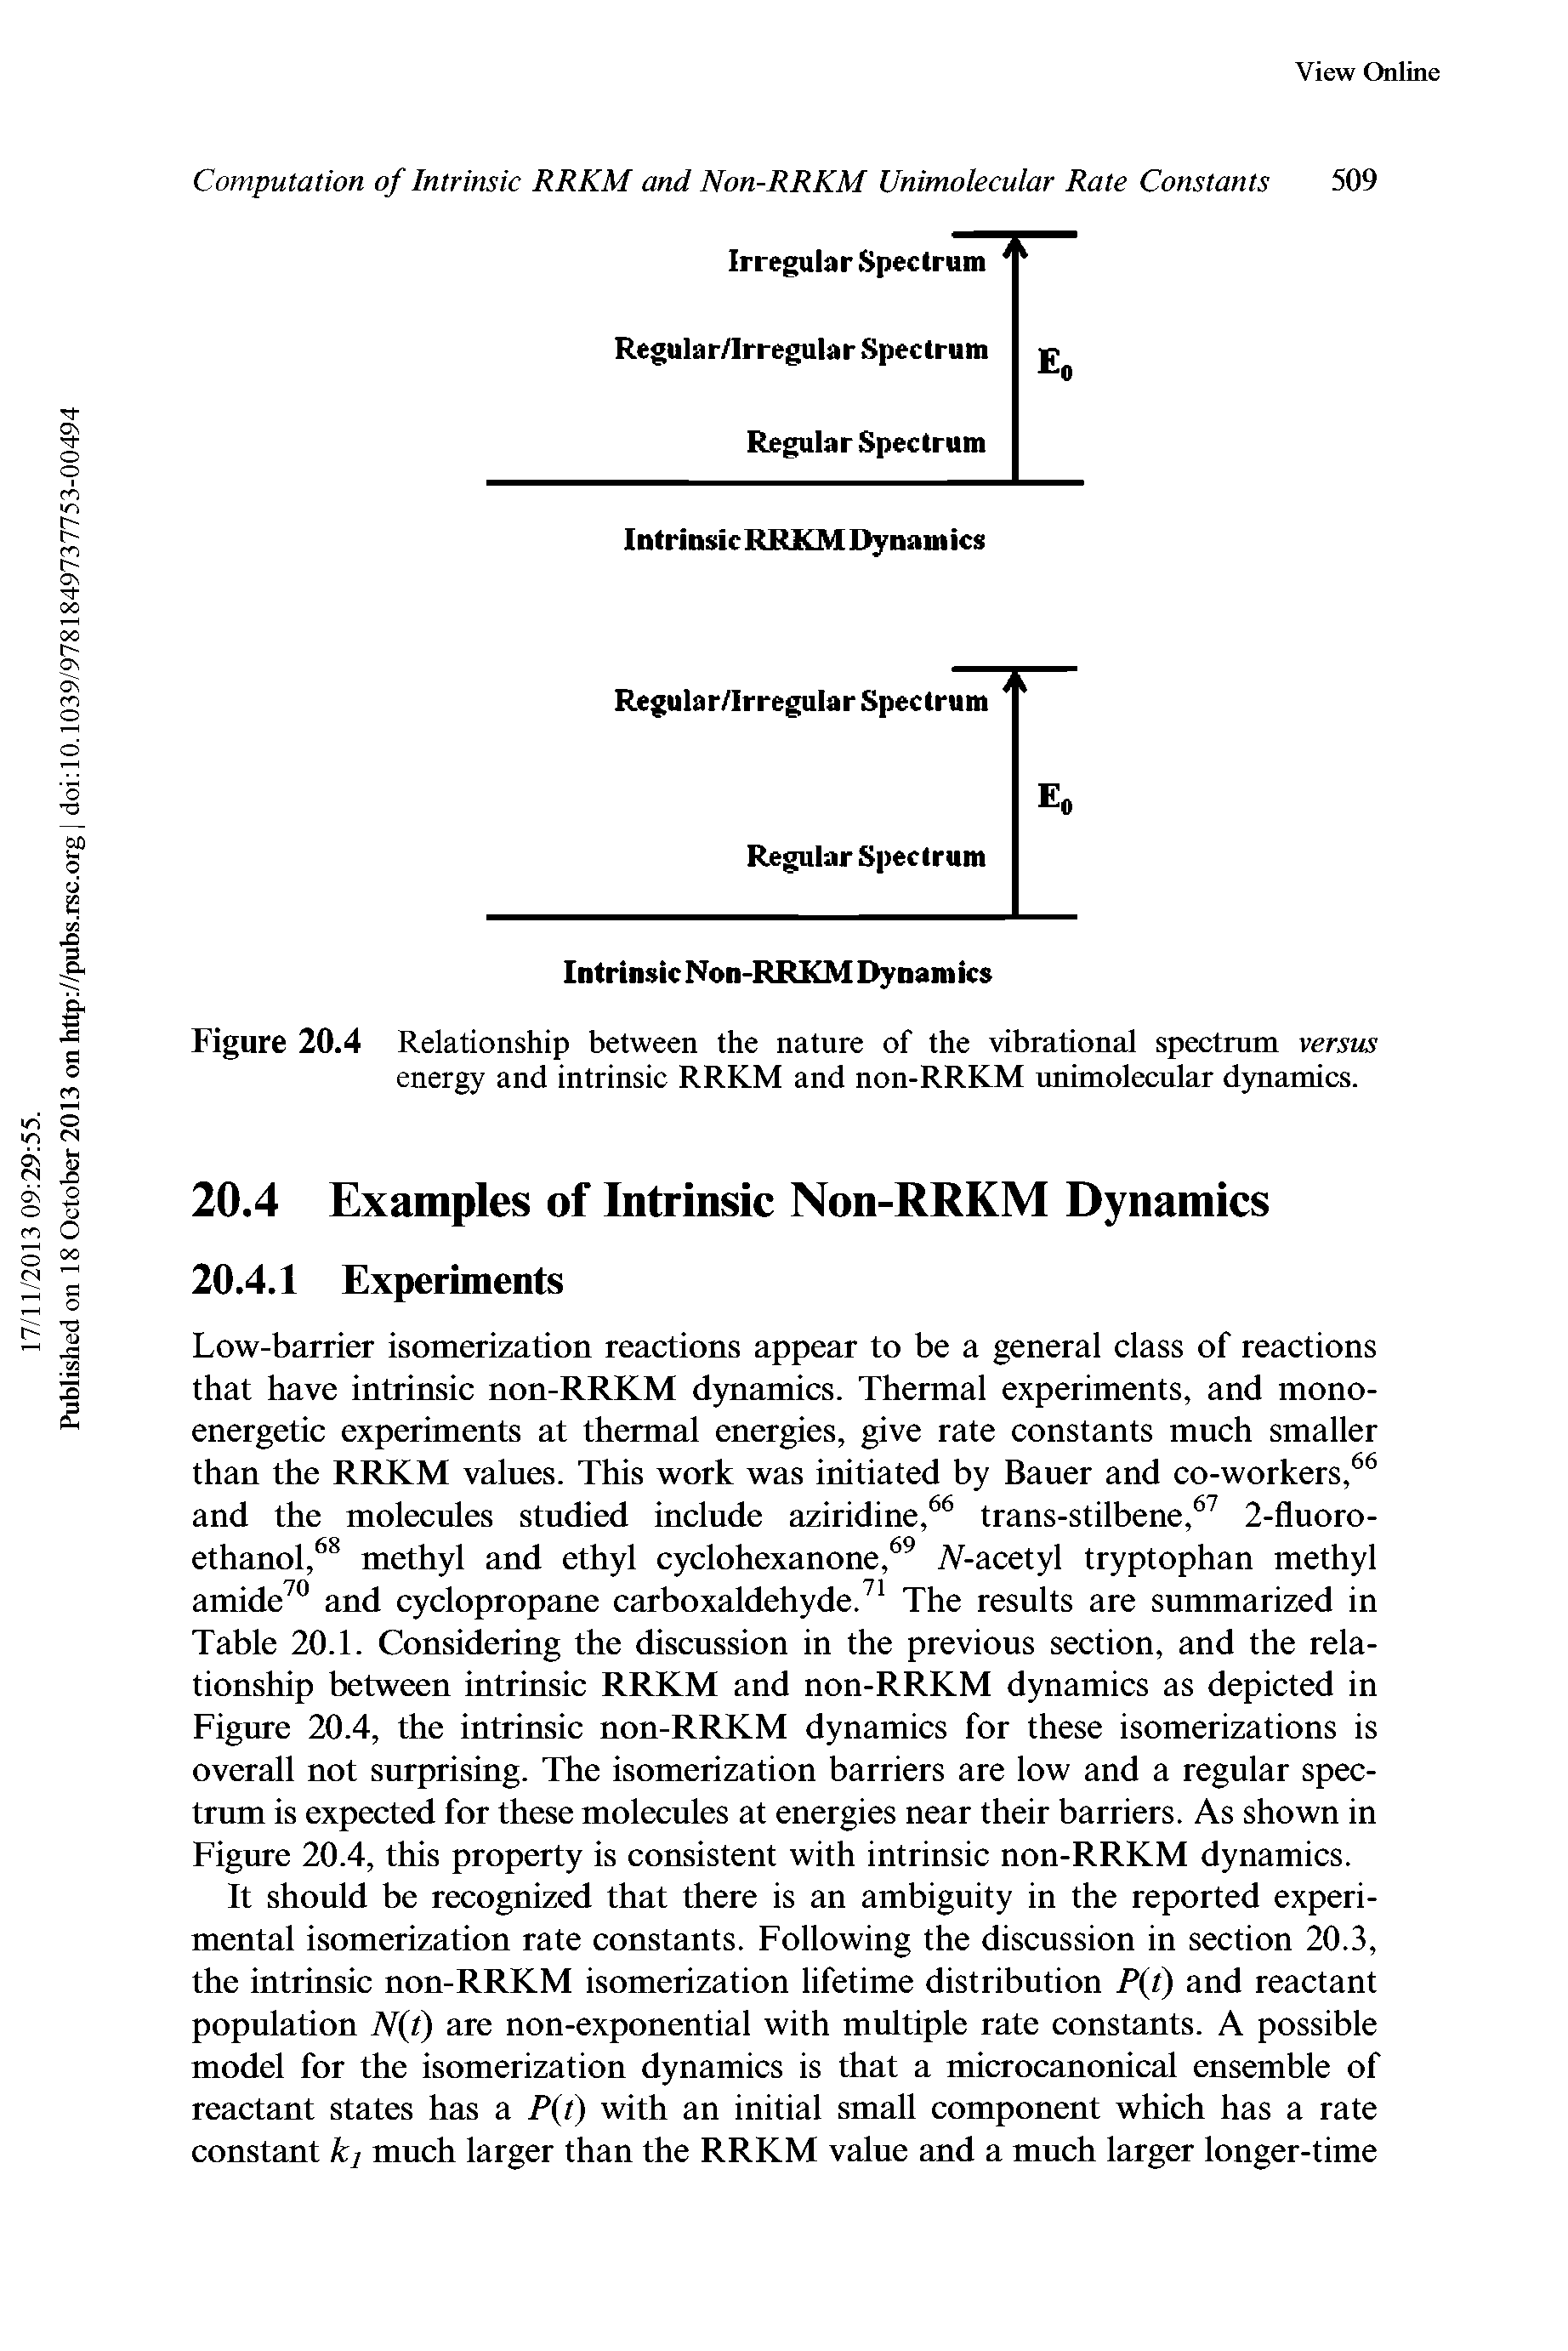 Figure 20.4 Relationship between the nature of the vibrational spectrum versus energy and intrinsic RRKM and non-RRKM unimolecular dynamics.